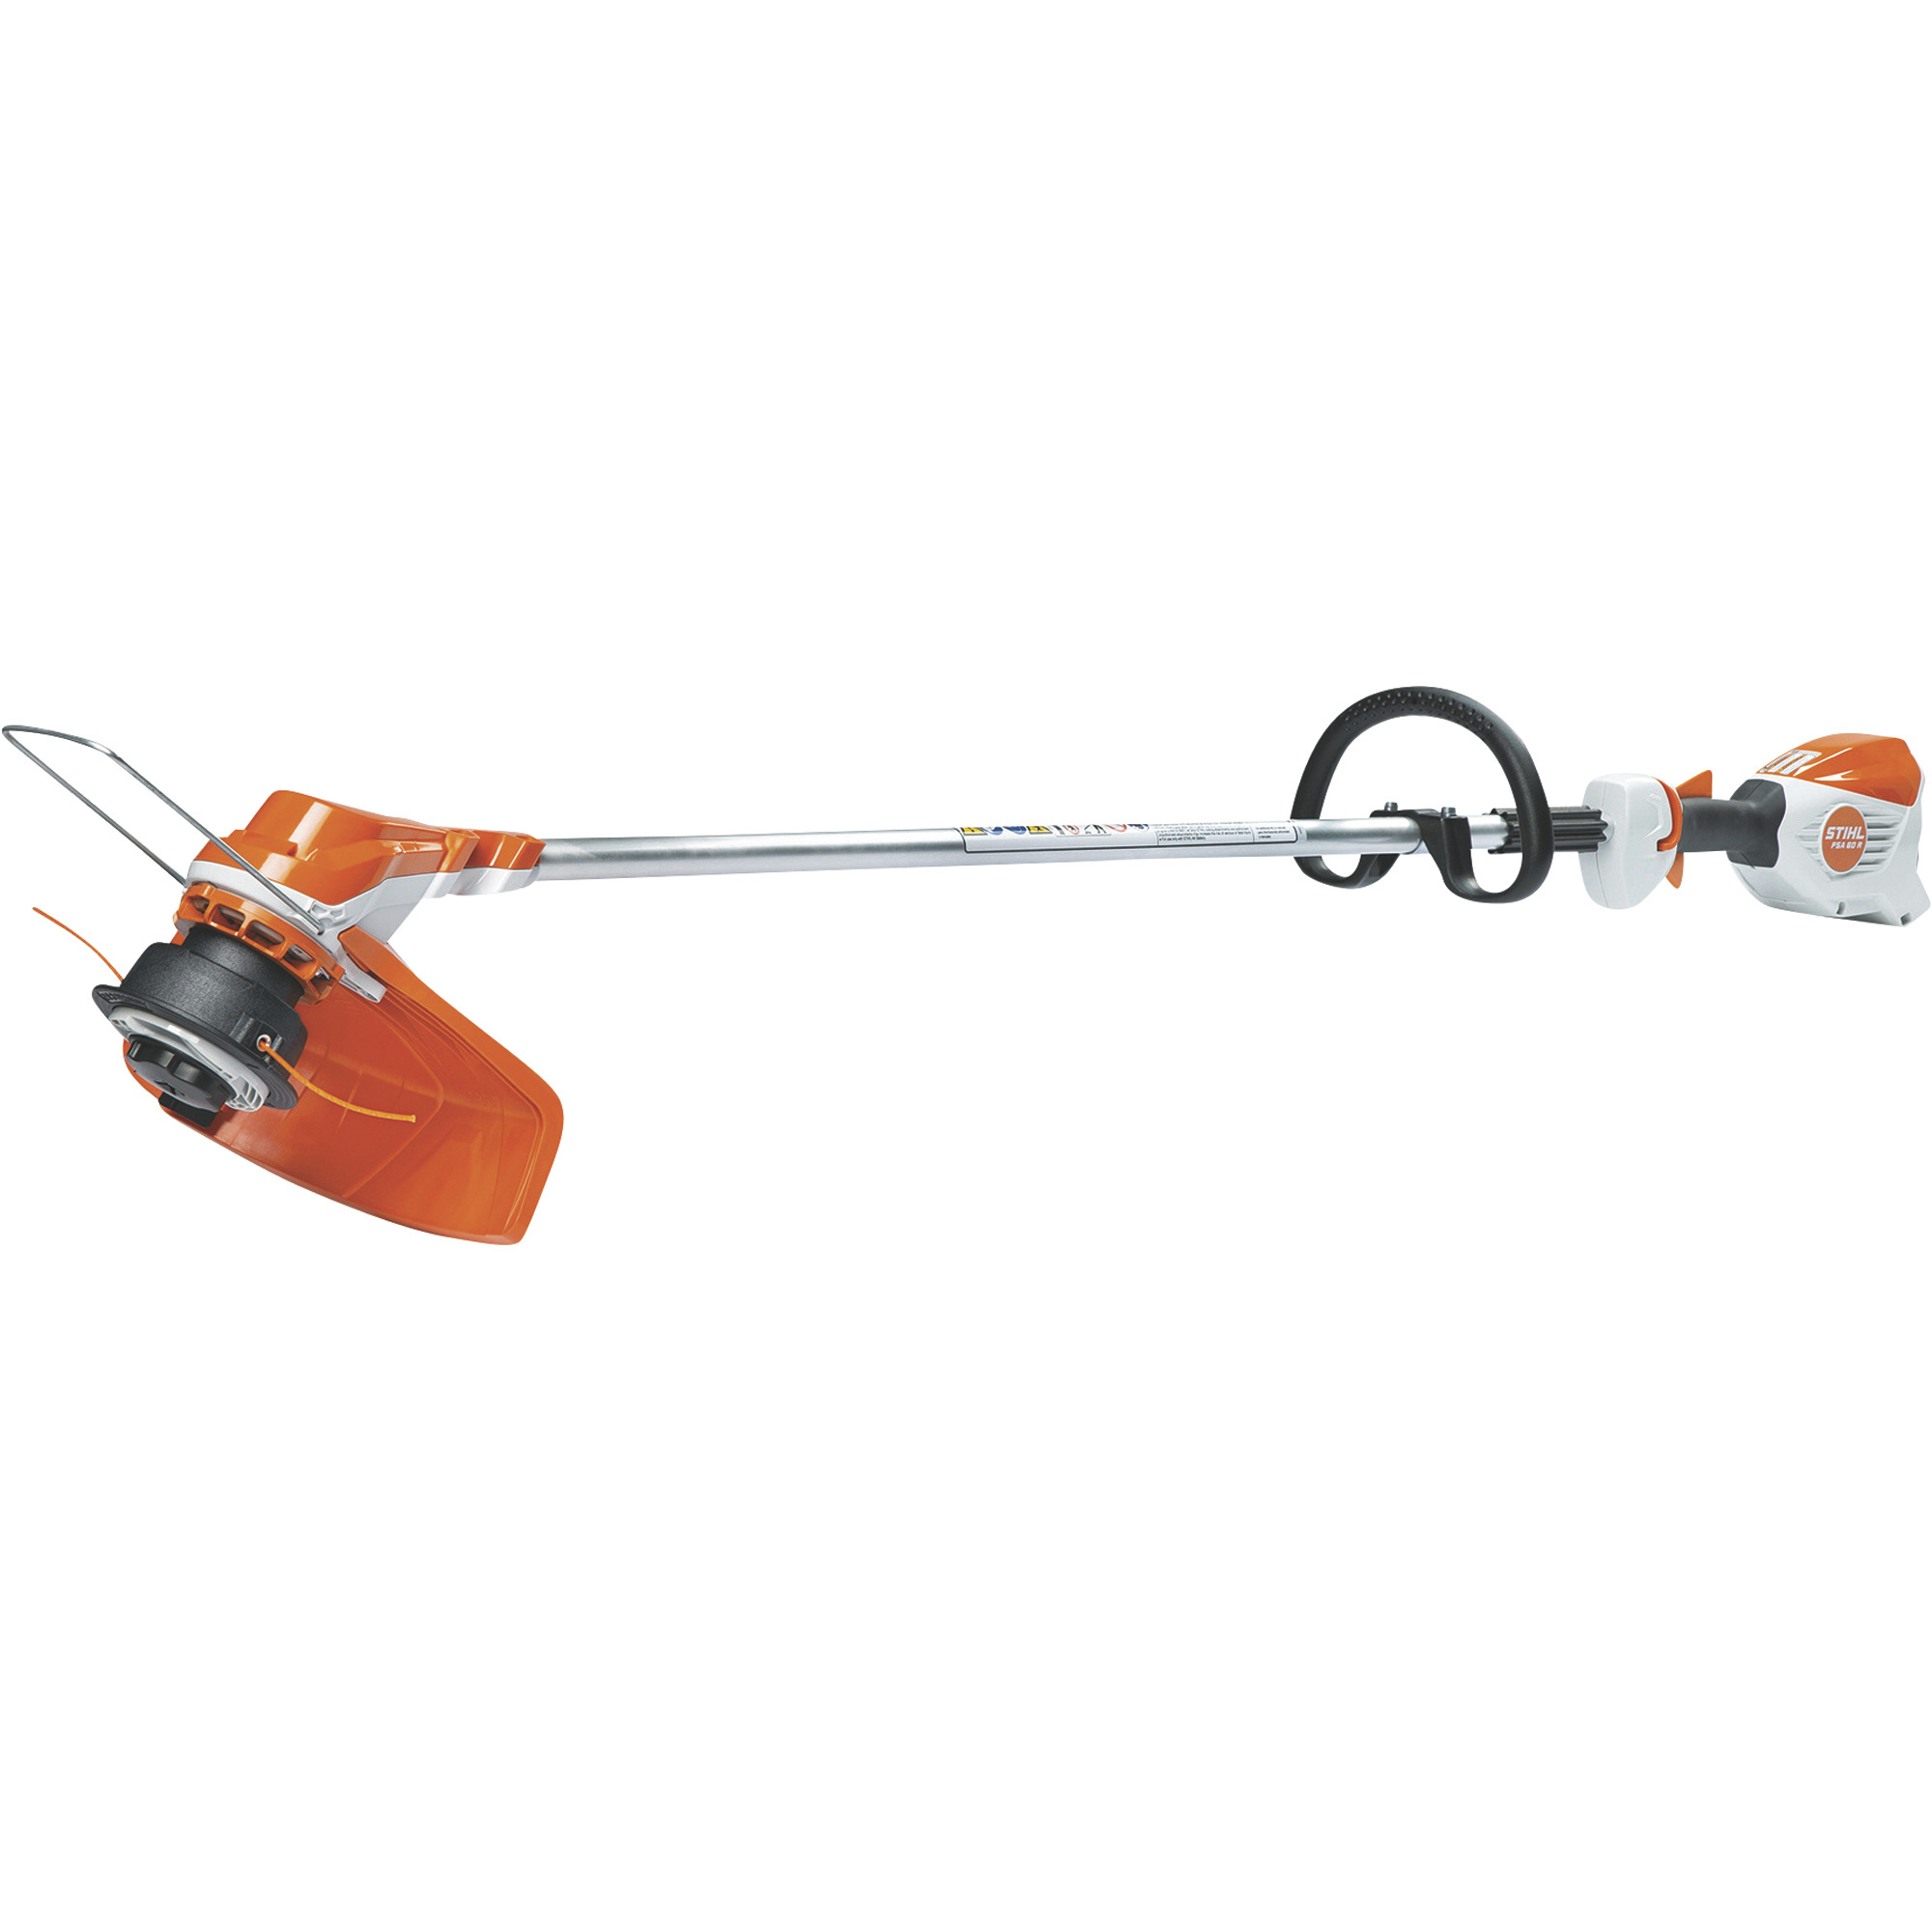 Stihl Battery-Operated AK Series 36 Volt Cordless Straight Shaft String Trimmer Kit â AK 20 Ion Battery, 14Inch Cutting Width, Model FSA 60 R Set